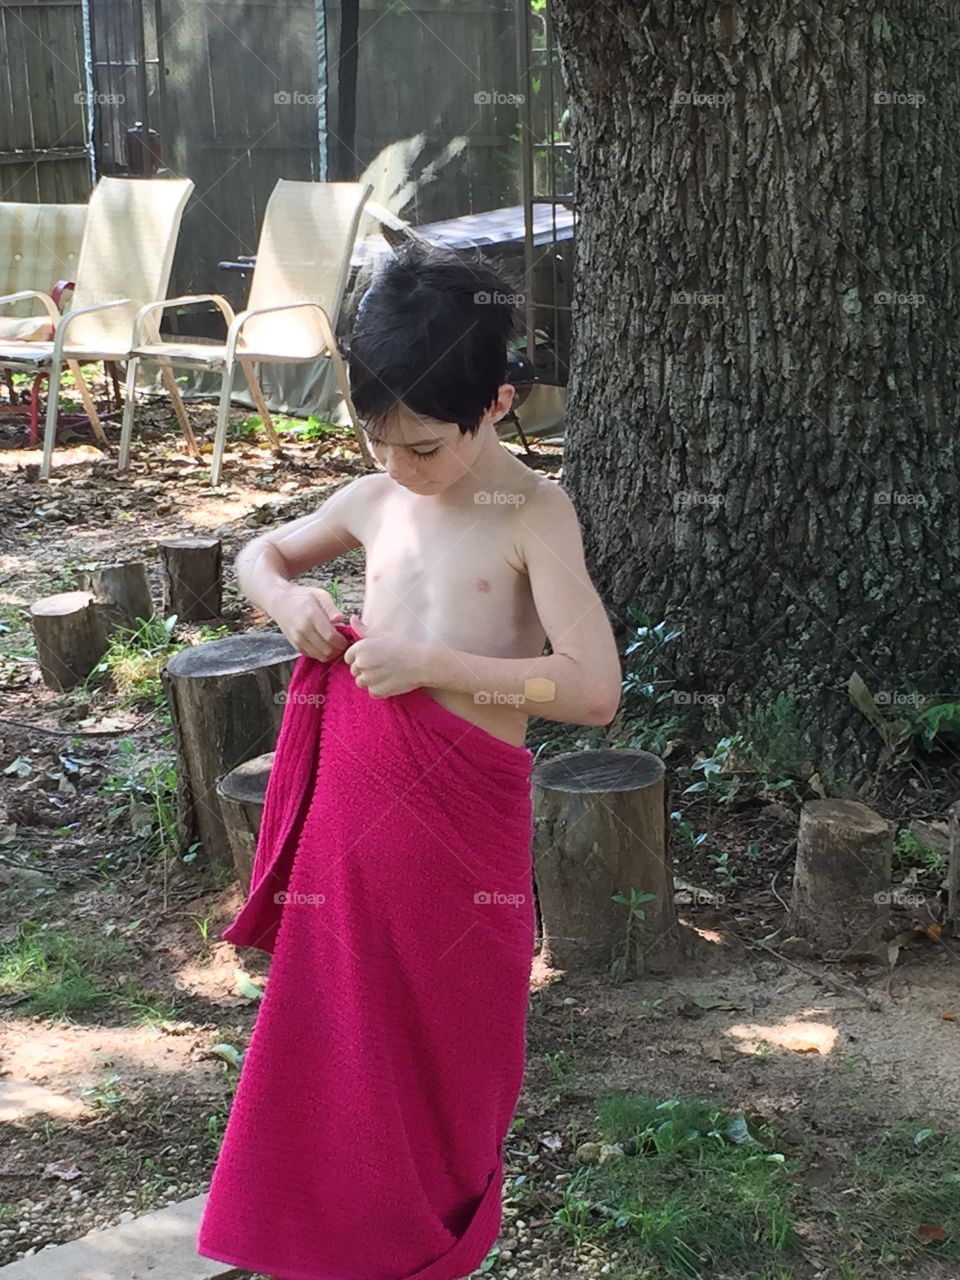 6 year old boy putting his towel around him after swimming.